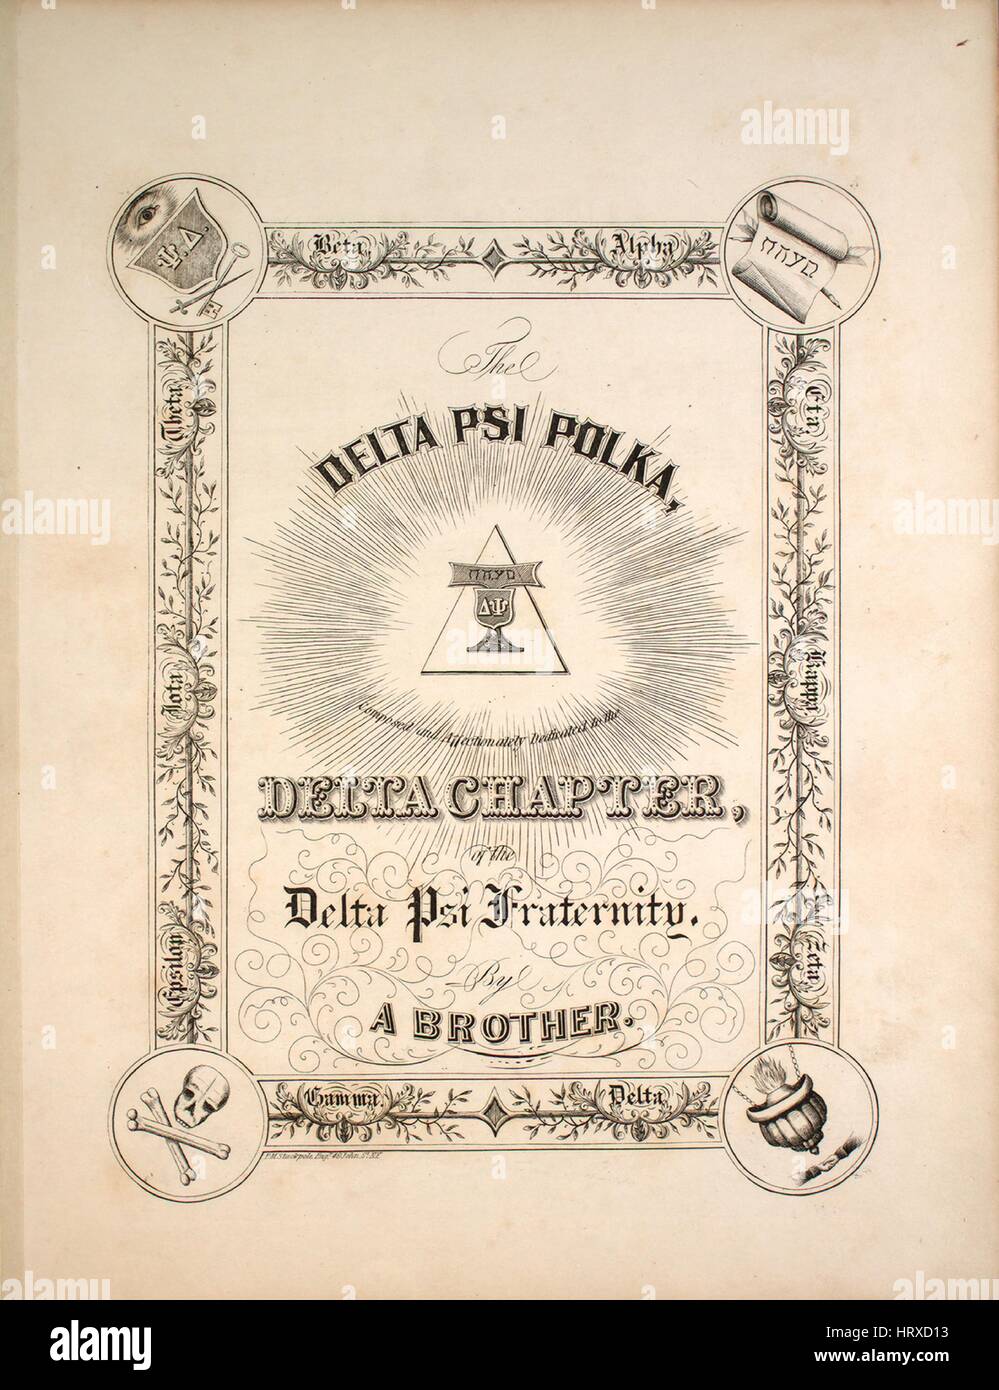 Sheet music cover image of the song 'The Delta Psi Polka', with original authorship notes reading 'Composed by a Brother', 1900. The publisher is listed as '', the form of composition is 'sectional', the instrumentation is 'piano', the first line reads 'None', and the illustration artist is listed as 'Pearson Engr. N.Y.'. Stock Photo